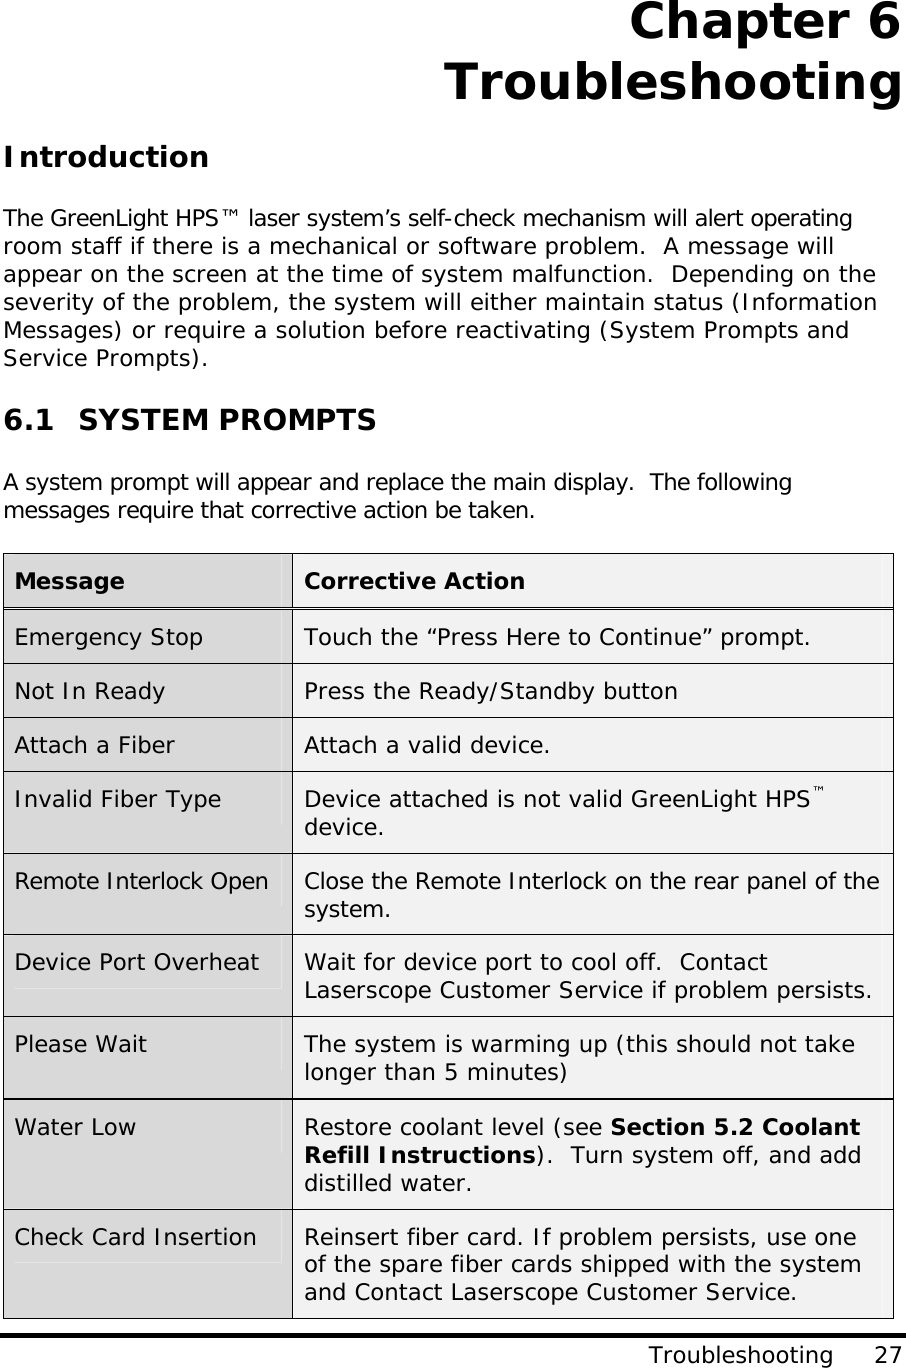     Chapter 6 Troubleshooting Troubleshooting     27 Introduction  The GreenLight HPS™ laser system’s self-check mechanism will alert operating room staff if there is a mechanical or software problem.  A message will appear on the screen at the time of system malfunction.  Depending on the severity of the problem, the system will either maintain status (Information Messages) or require a solution before reactivating (System Prompts and Service Prompts).   6.1 SYSTEM PROMPTS  A system prompt will appear and replace the main display.  The following messages require that corrective action be taken.    Message  Corrective Action Emergency Stop  Touch the “Press Here to Continue” prompt. Not In Ready  Press the Ready/Standby button Attach a Fiber  Attach a valid device. Invalid Fiber Type  Device attached is not valid GreenLight HPS™ device. Remote Interlock Open  Close the Remote Interlock on the rear panel of the system. Device Port Overheat  Wait for device port to cool off.  Contact Laserscope Customer Service if problem persists. Please Wait  The system is warming up (this should not take longer than 5 minutes) Water Low  Restore coolant level (see Section 5.2 Coolant Refill Instructions).  Turn system off, and add distilled water. Check Card Insertion  Reinsert fiber card. If problem persists, use one of the spare fiber cards shipped with the system and Contact Laserscope Customer Service.  